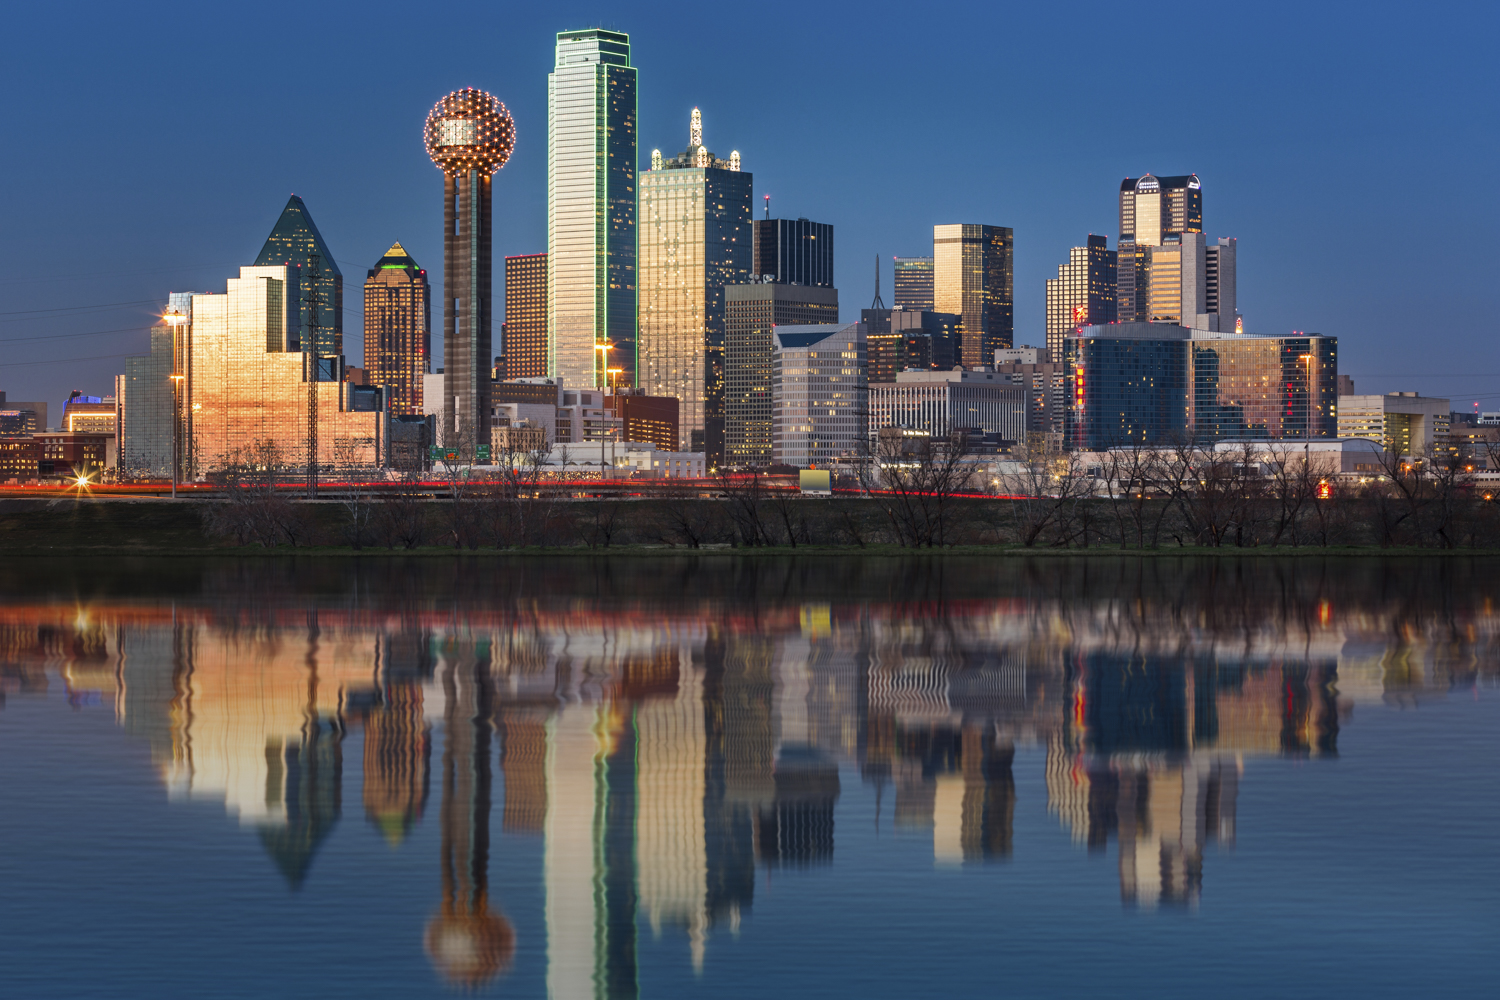 Dallas skyline at sunset © Ultima_Gaina / iStock / Getty Images Plus